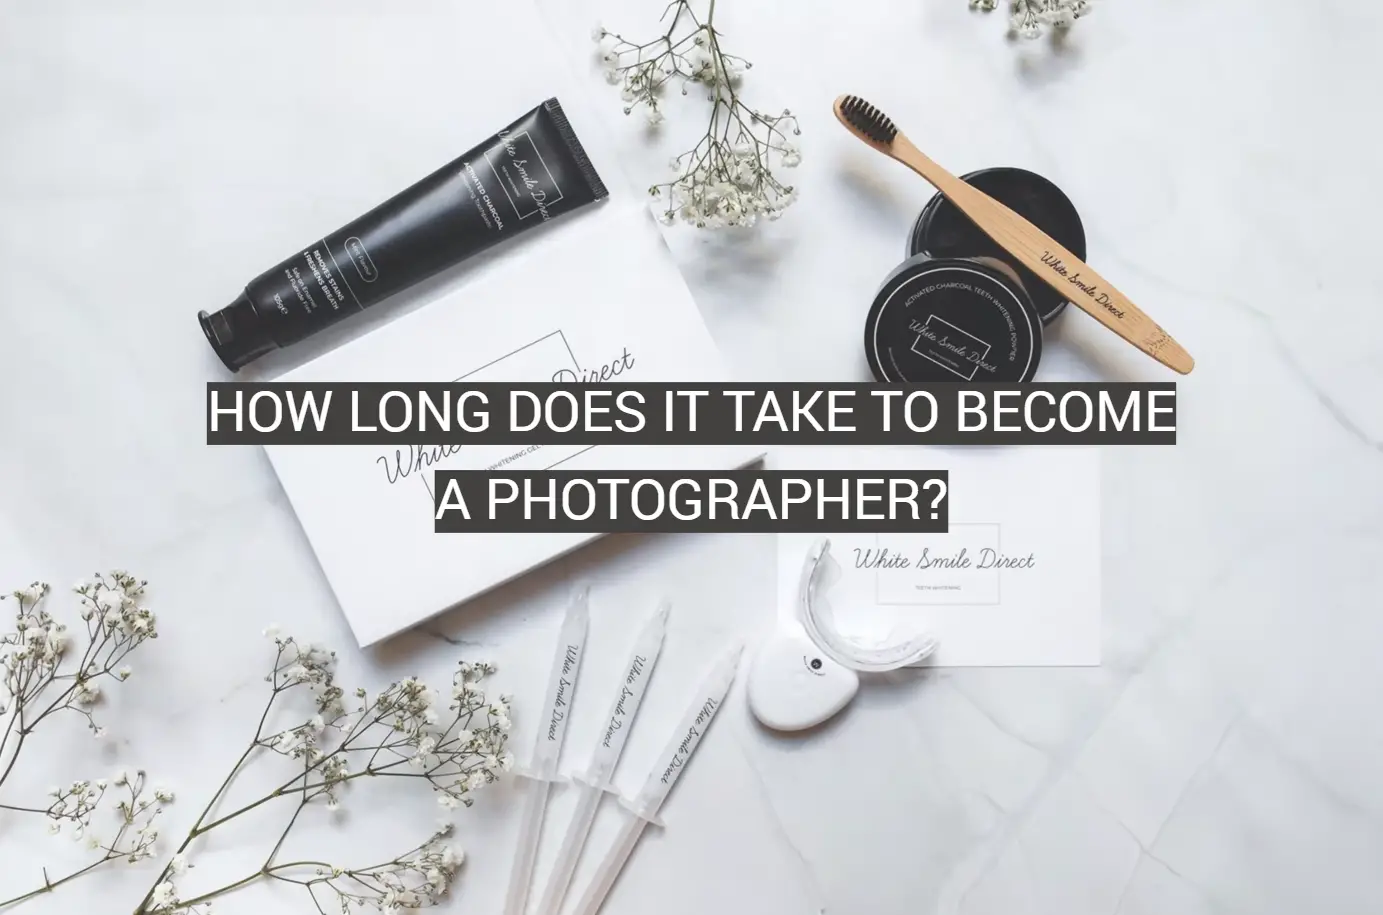 How Long Does It Take To Become a Photographer?